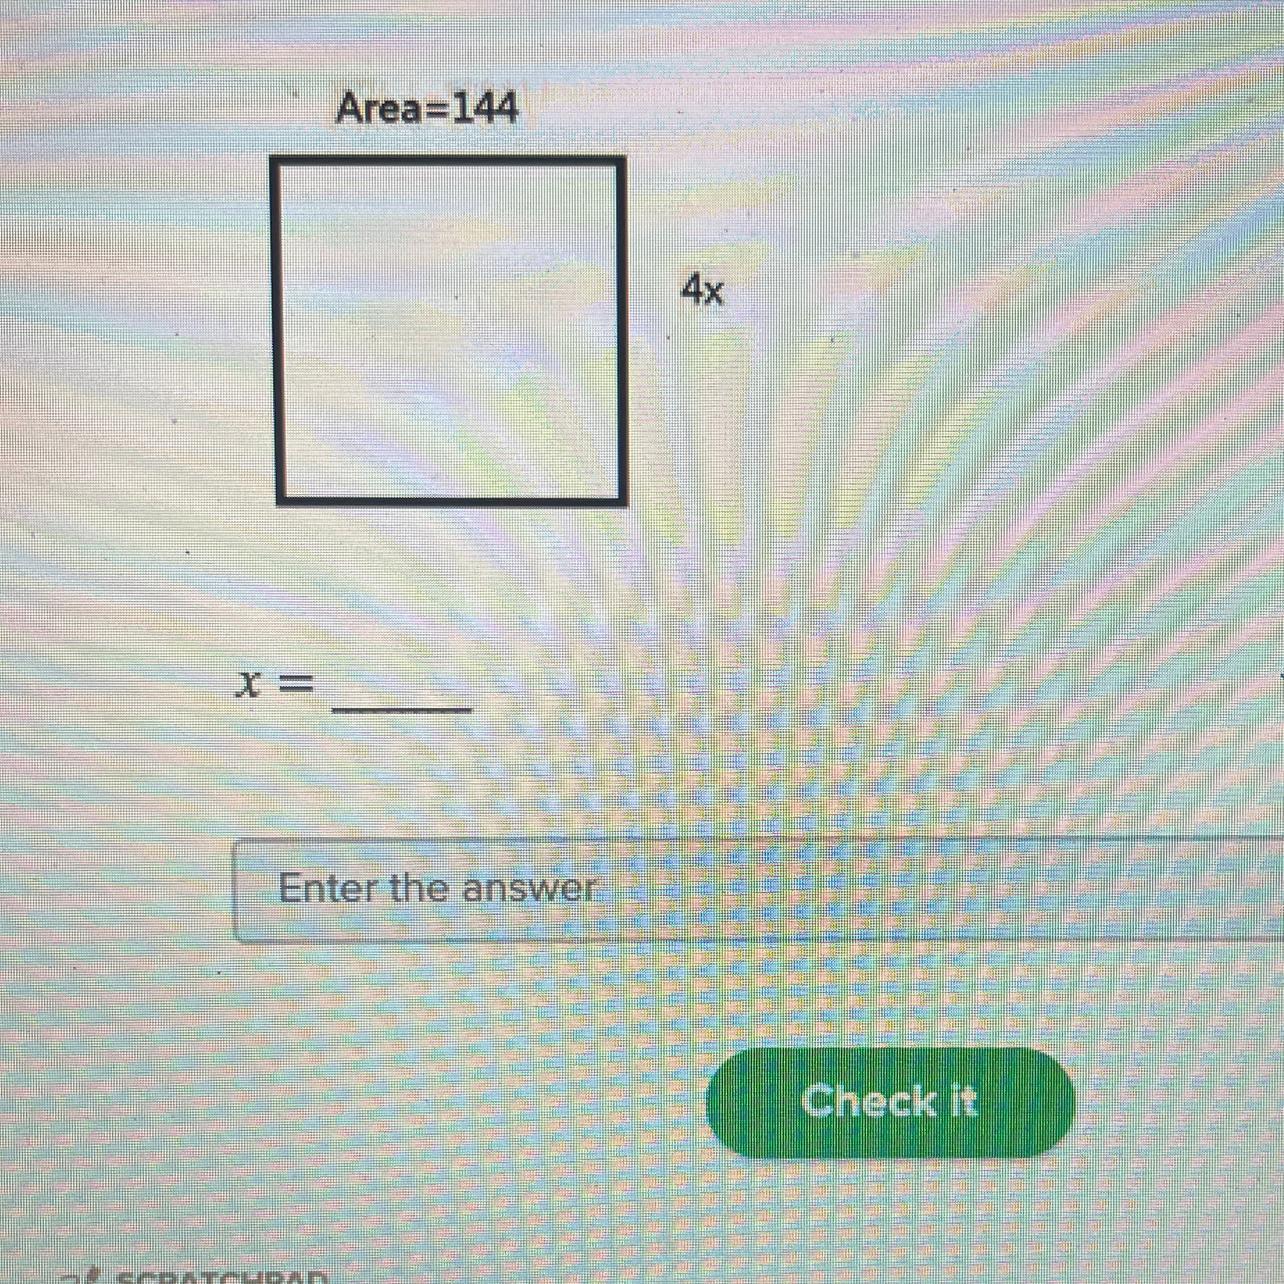 PLS HELP I Dont Know The Answer